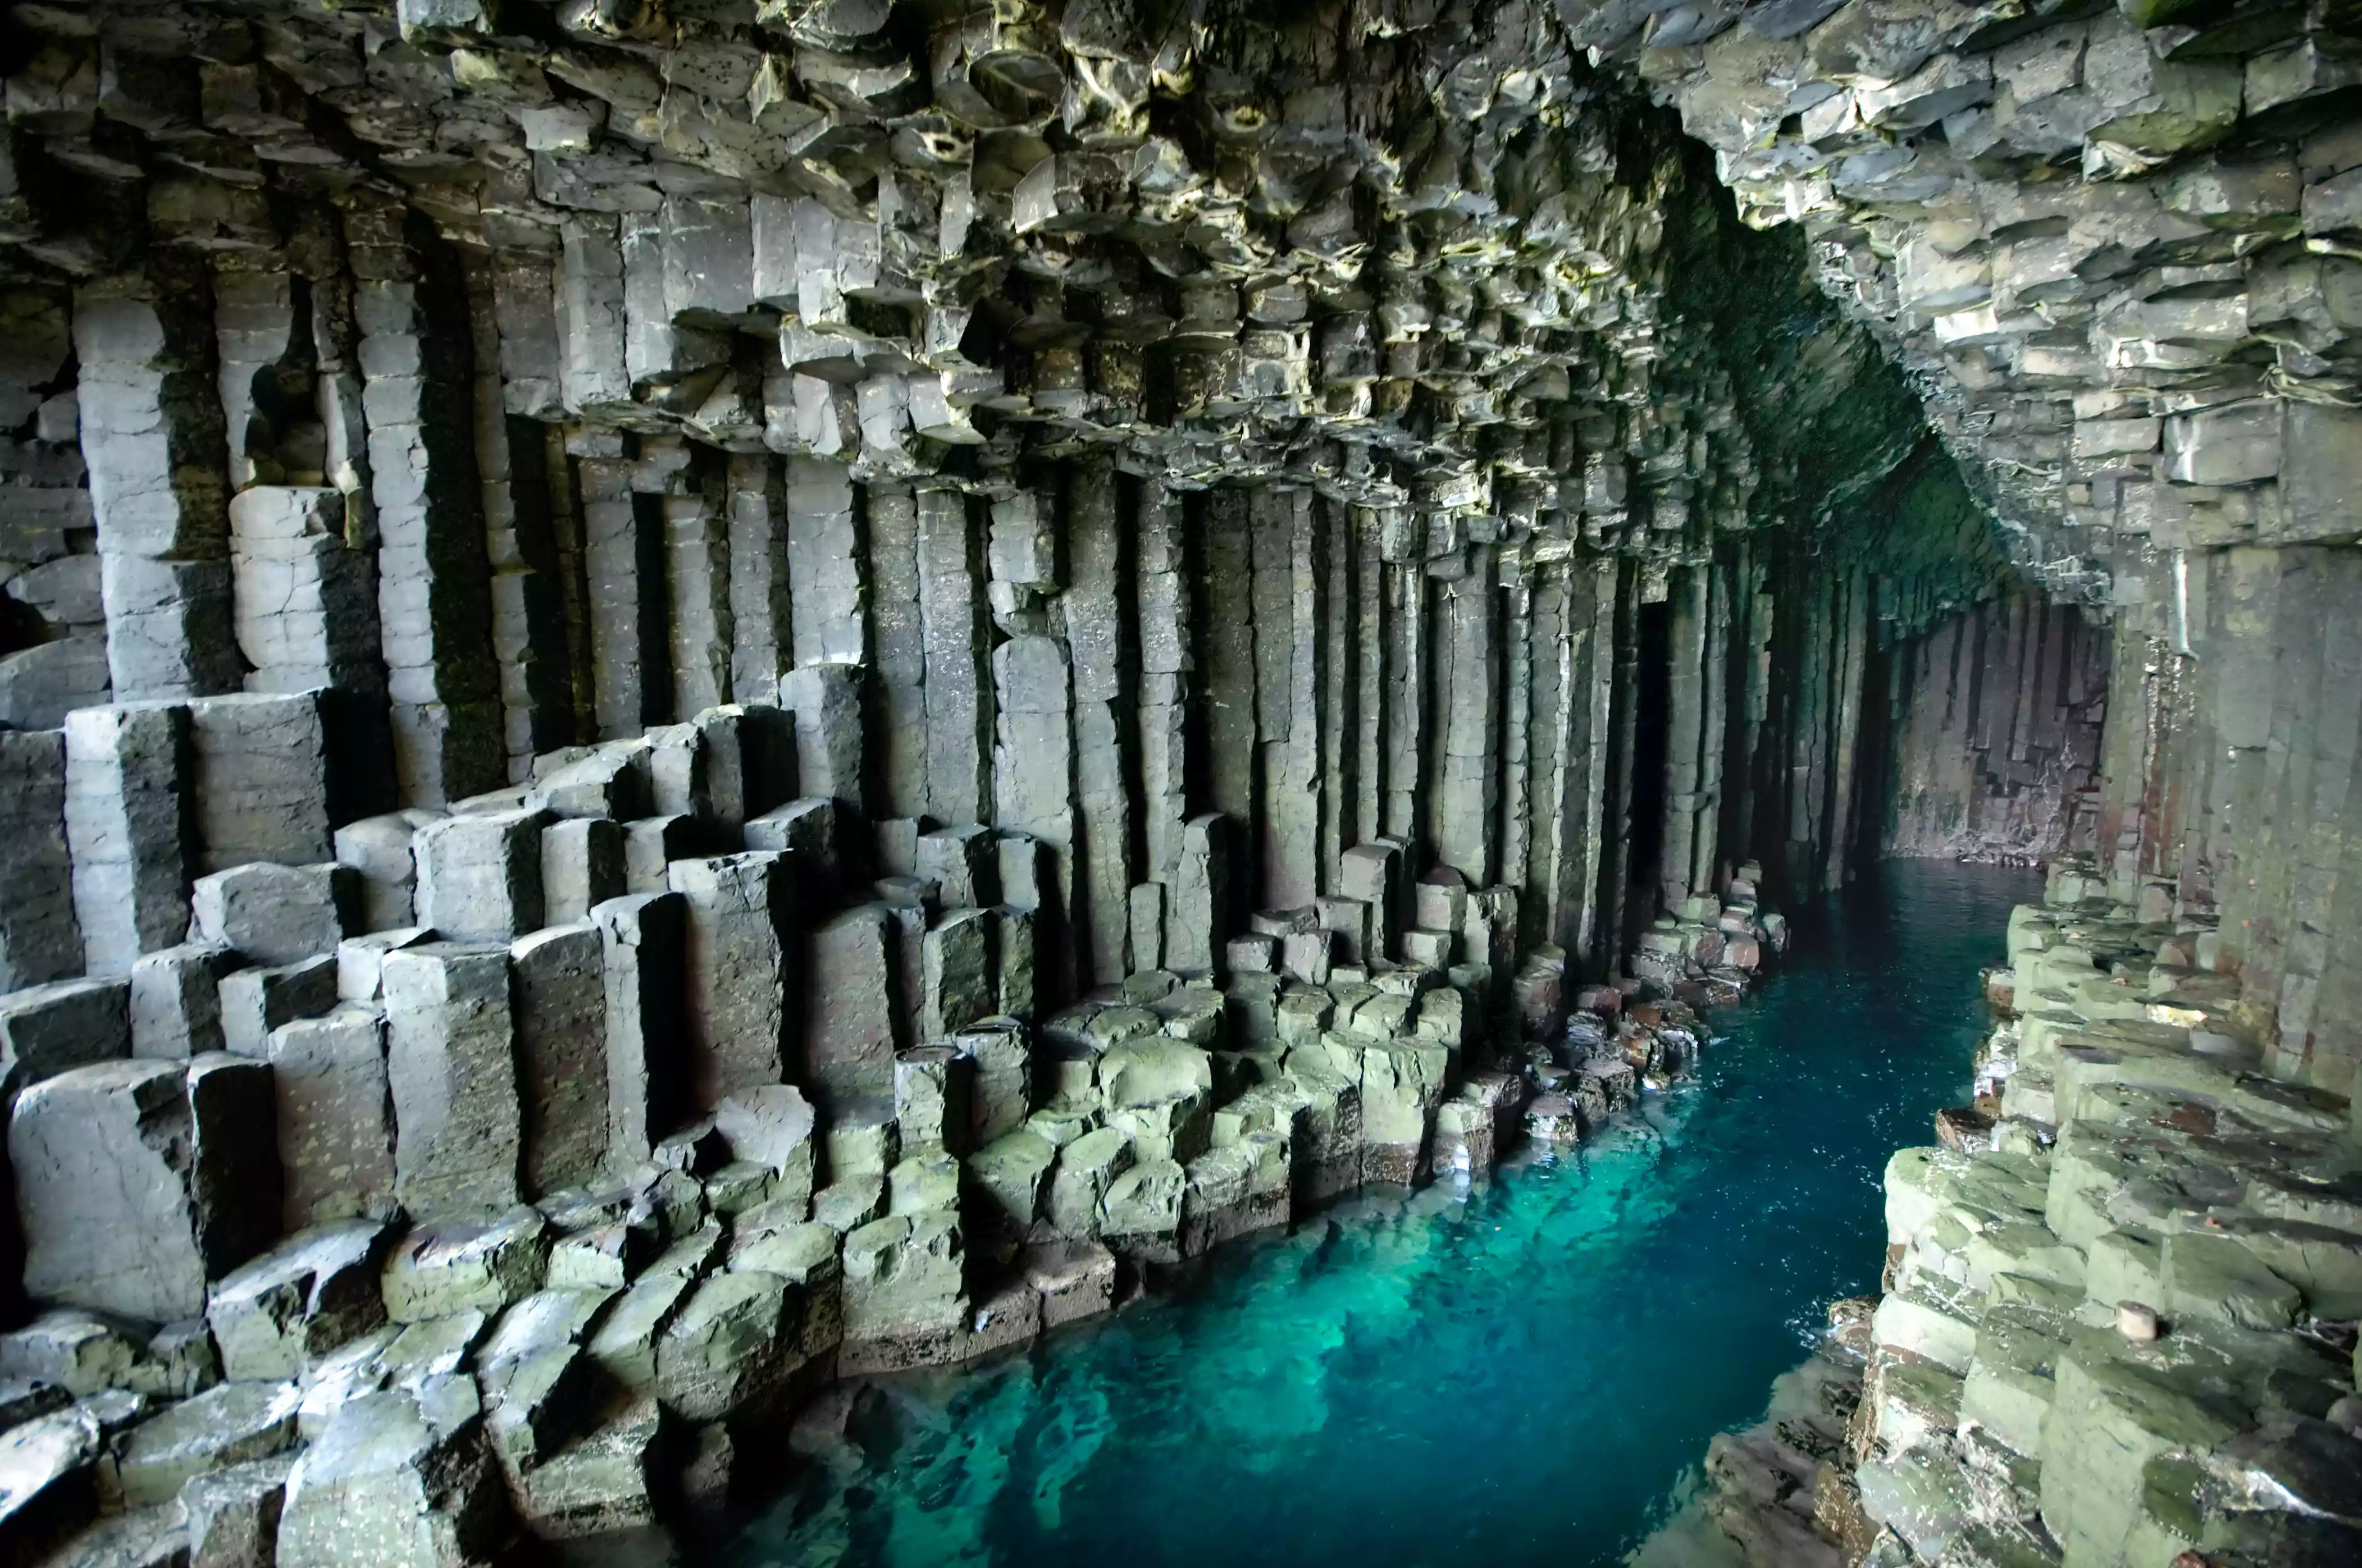 Basalt columns rising from blue water in Fingal's Cave